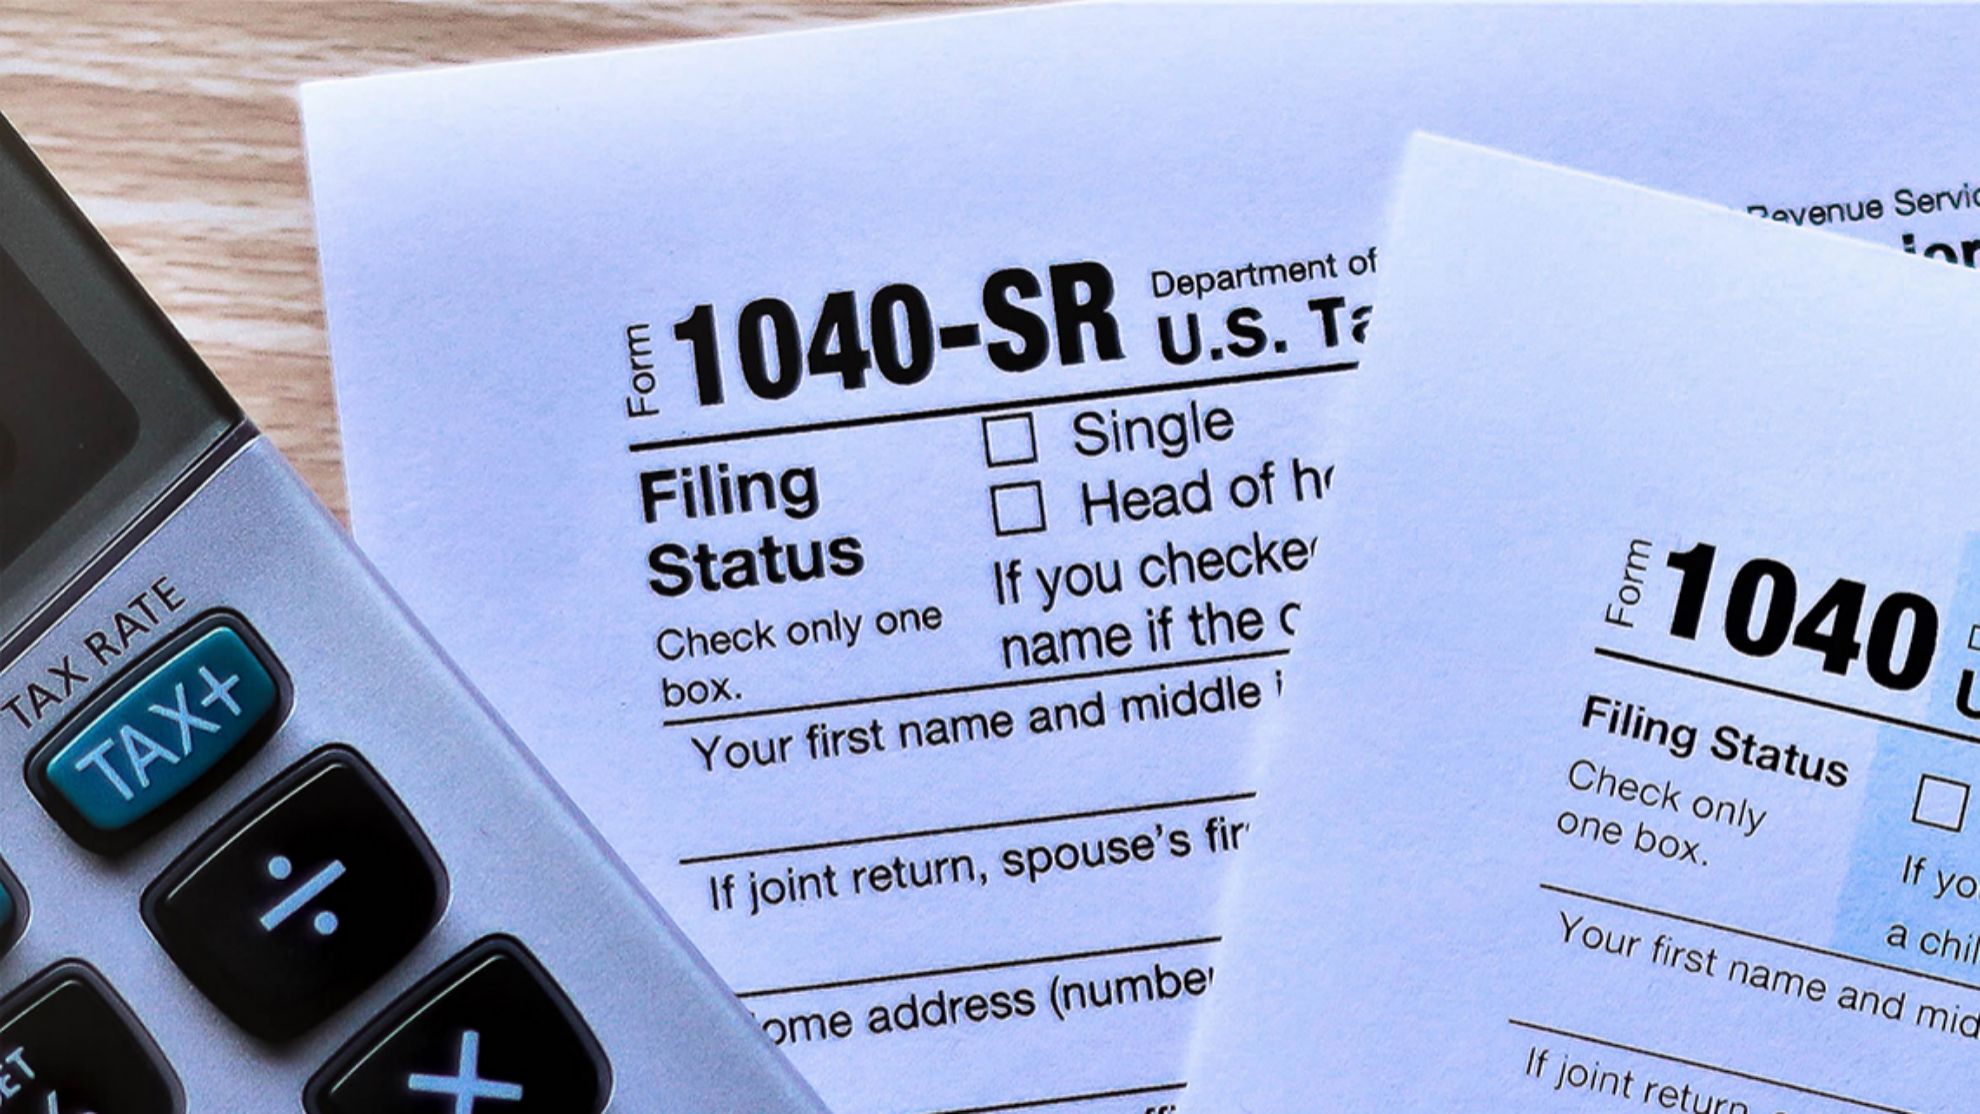 Irs 2022 Form 1040 Schedule 1 Irs Tax Forms: What Is Form 1040-Sr, U.s. Tax Return For Seniors? | Marca